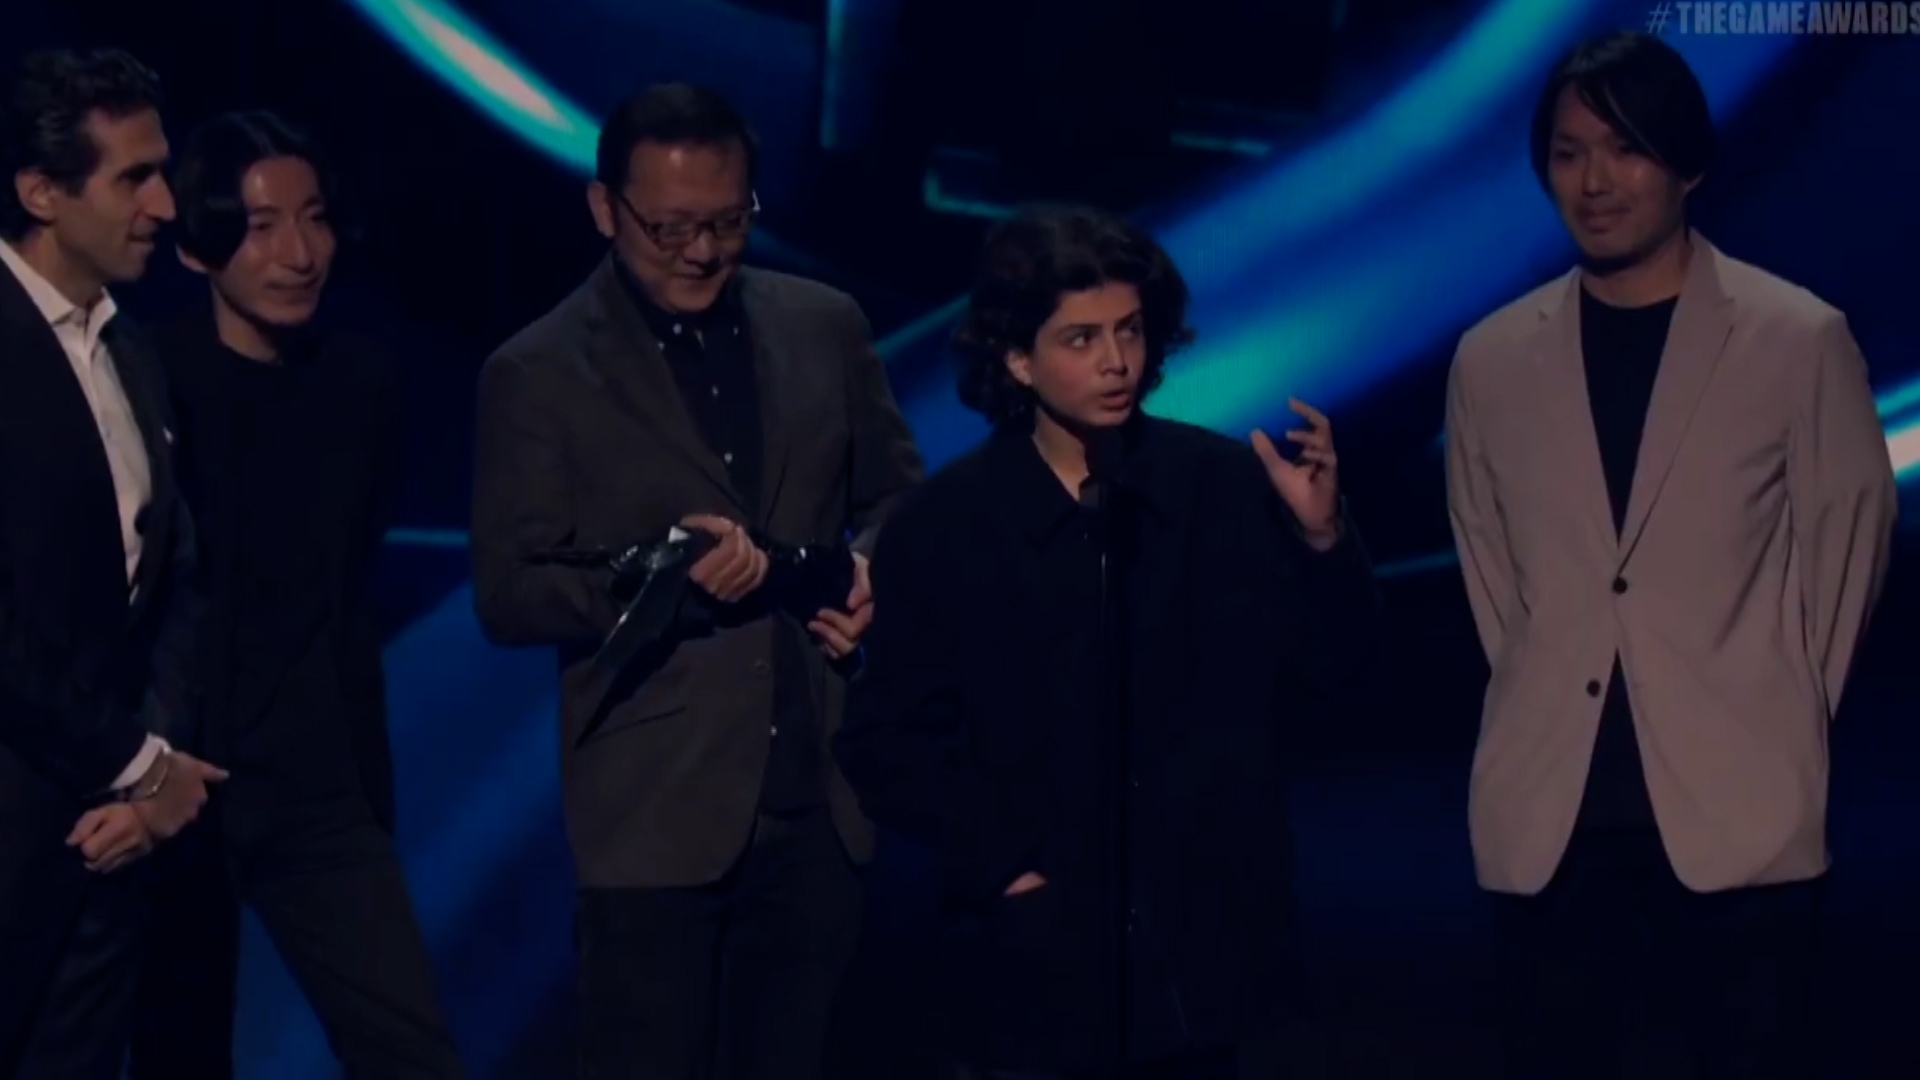 Random troll sneaks into The Game Awards 2022 and mocks Bill Clinton on stage, leaving audience speechless